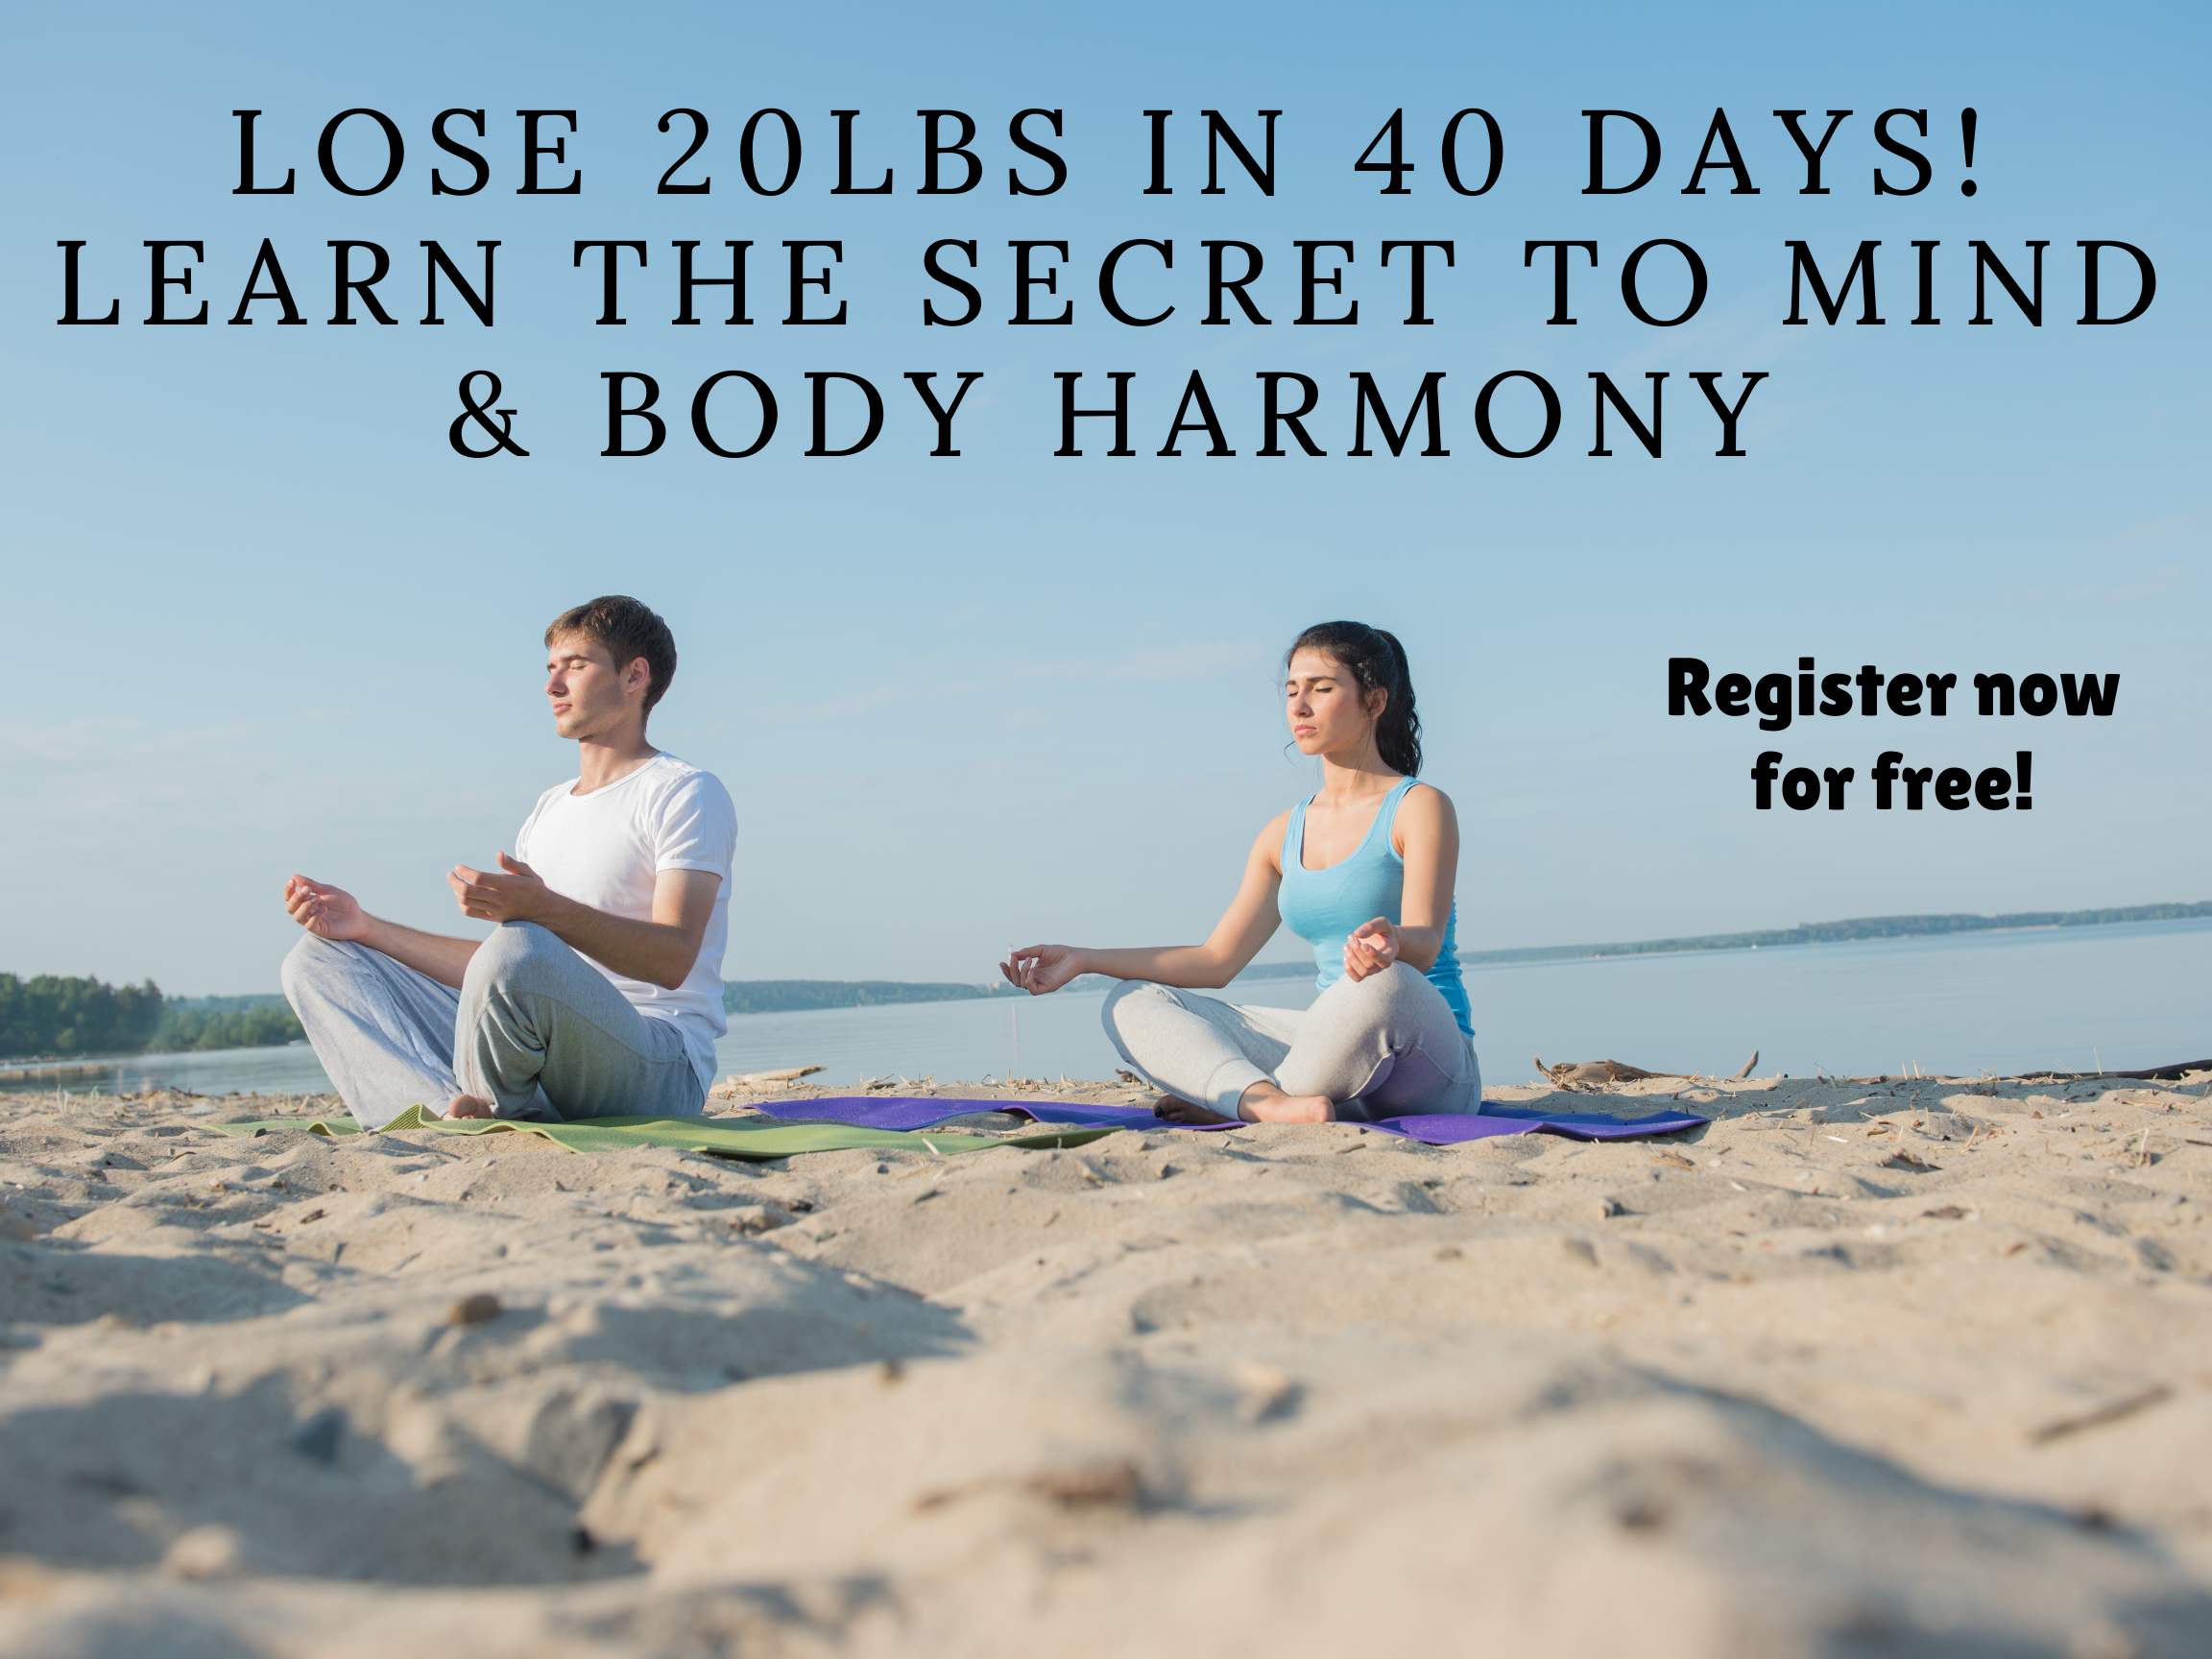 Lose 20 lbs in 40 days. The Secret to Mind & Body Harmony!